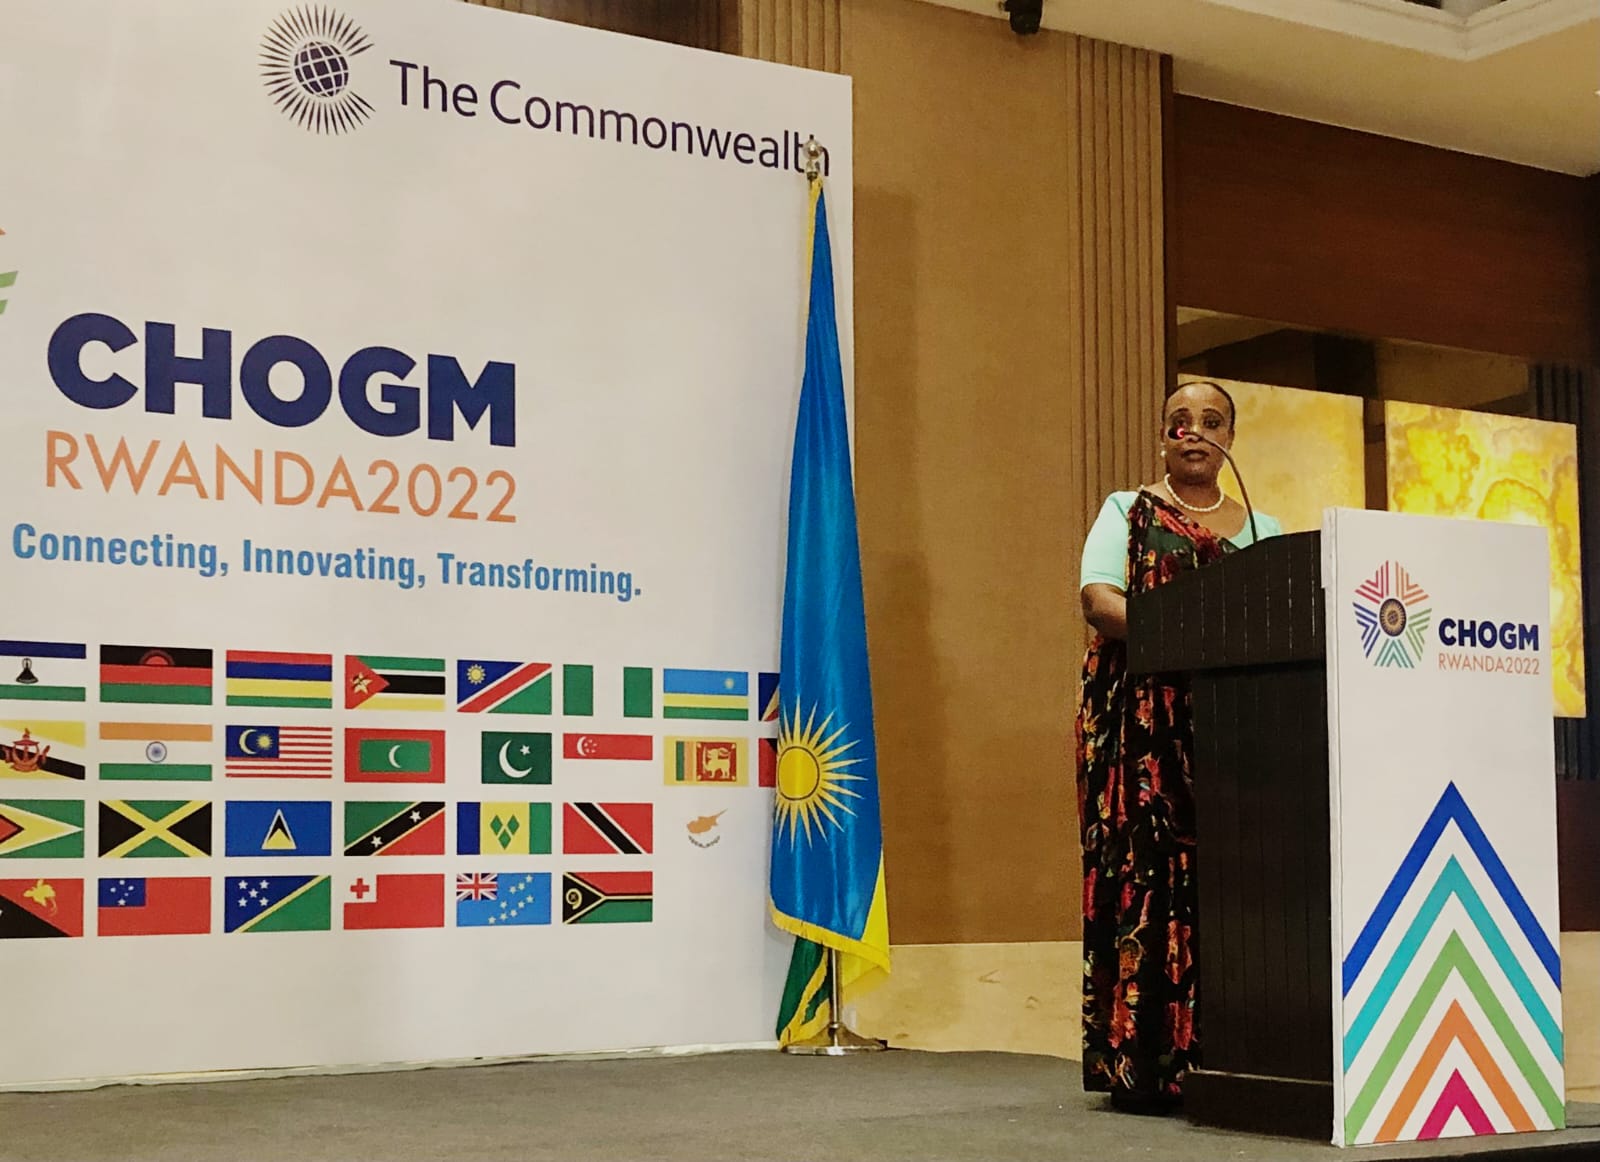 Jacqueline Mukangira, the High Commissioner of Rwanda to India, delivers remarks during u2018The Commonwealth Family Gatheringu2019 event, in New Delhi on May 27, 2022. 